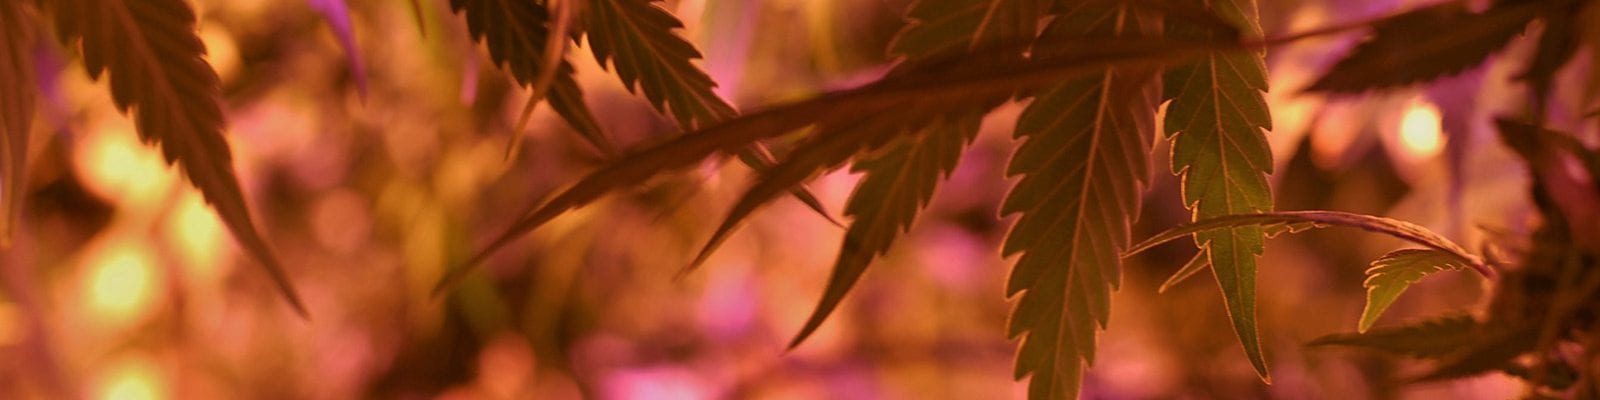 Behind the leaves of an indoor cannabis plant in a commercial grow room.